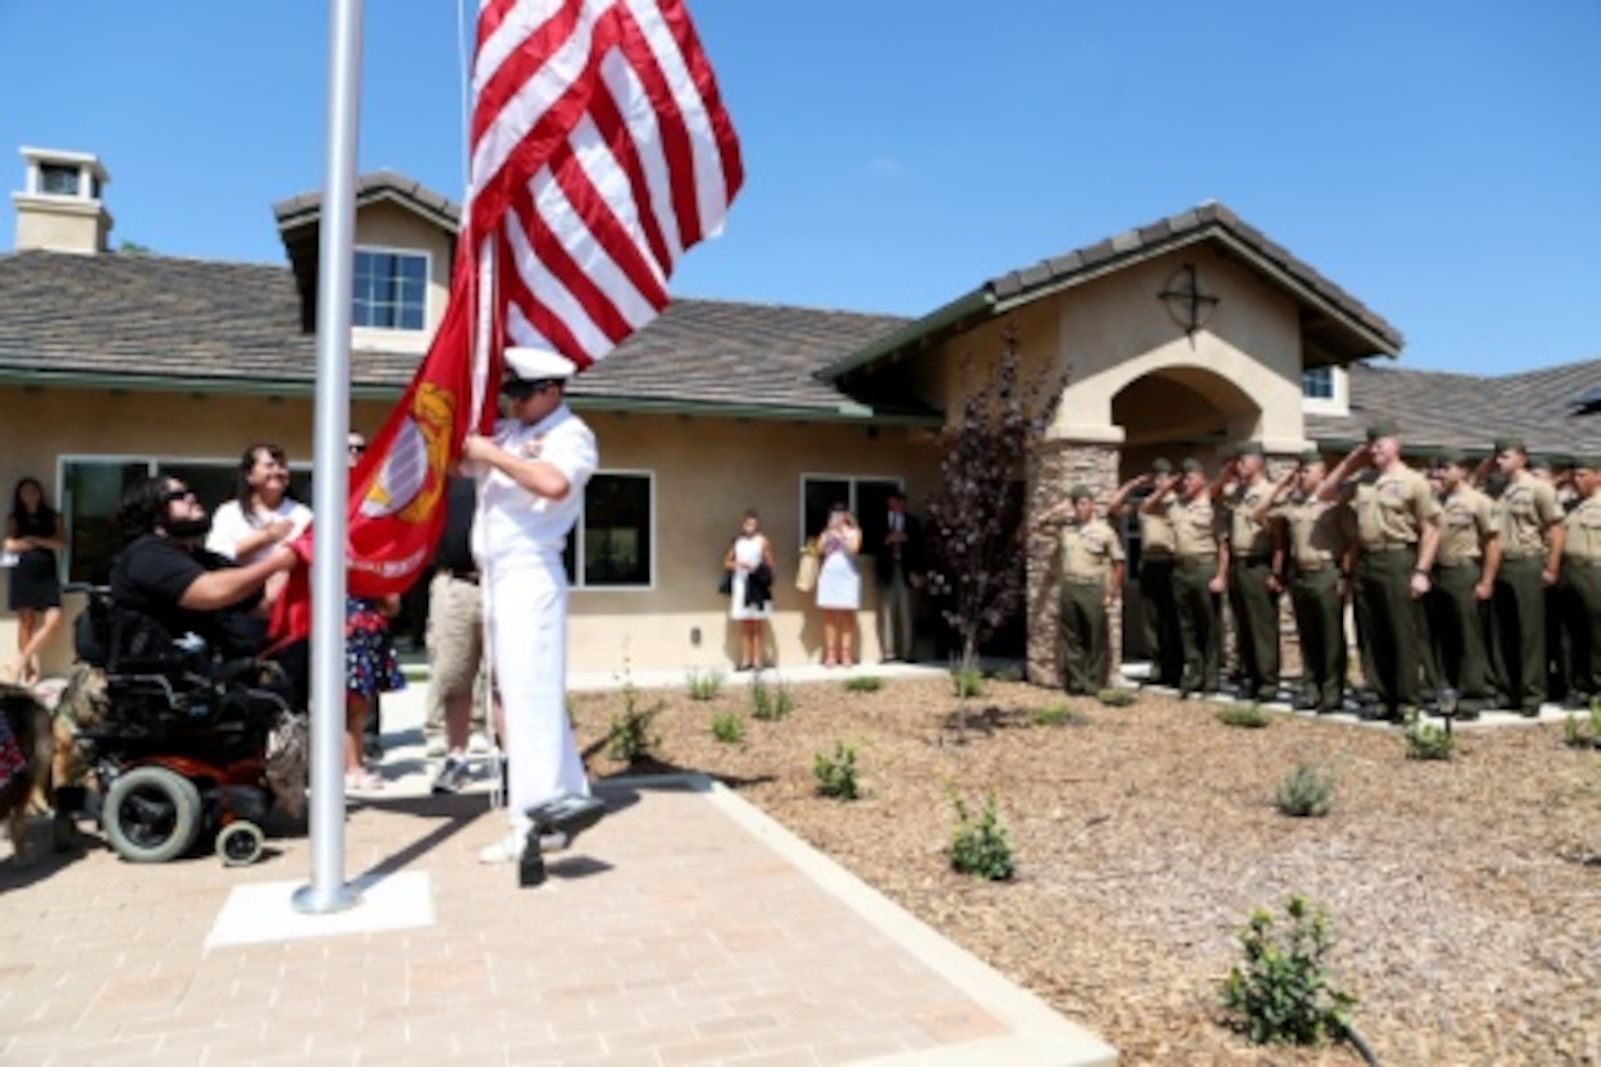 Marines from 1st Explosive Ordnance Disposal Company, 1st Marine Logistics Group look on as retired Staff Sgt. Jason Ross raises the national and Marine Corps colors in front of a new home dedicated to him and his family by The Gary Sinise Foundation. Ross was injured by an improvised explosive device in Afghanistan in 2011 while serving as an explosive ordnance disposal technician and lost both of his legs as a result. The new home has smart technology that will significantly reduce the difficulty of everyday tasks for Ross and allow him and his family to live more comfortably.
